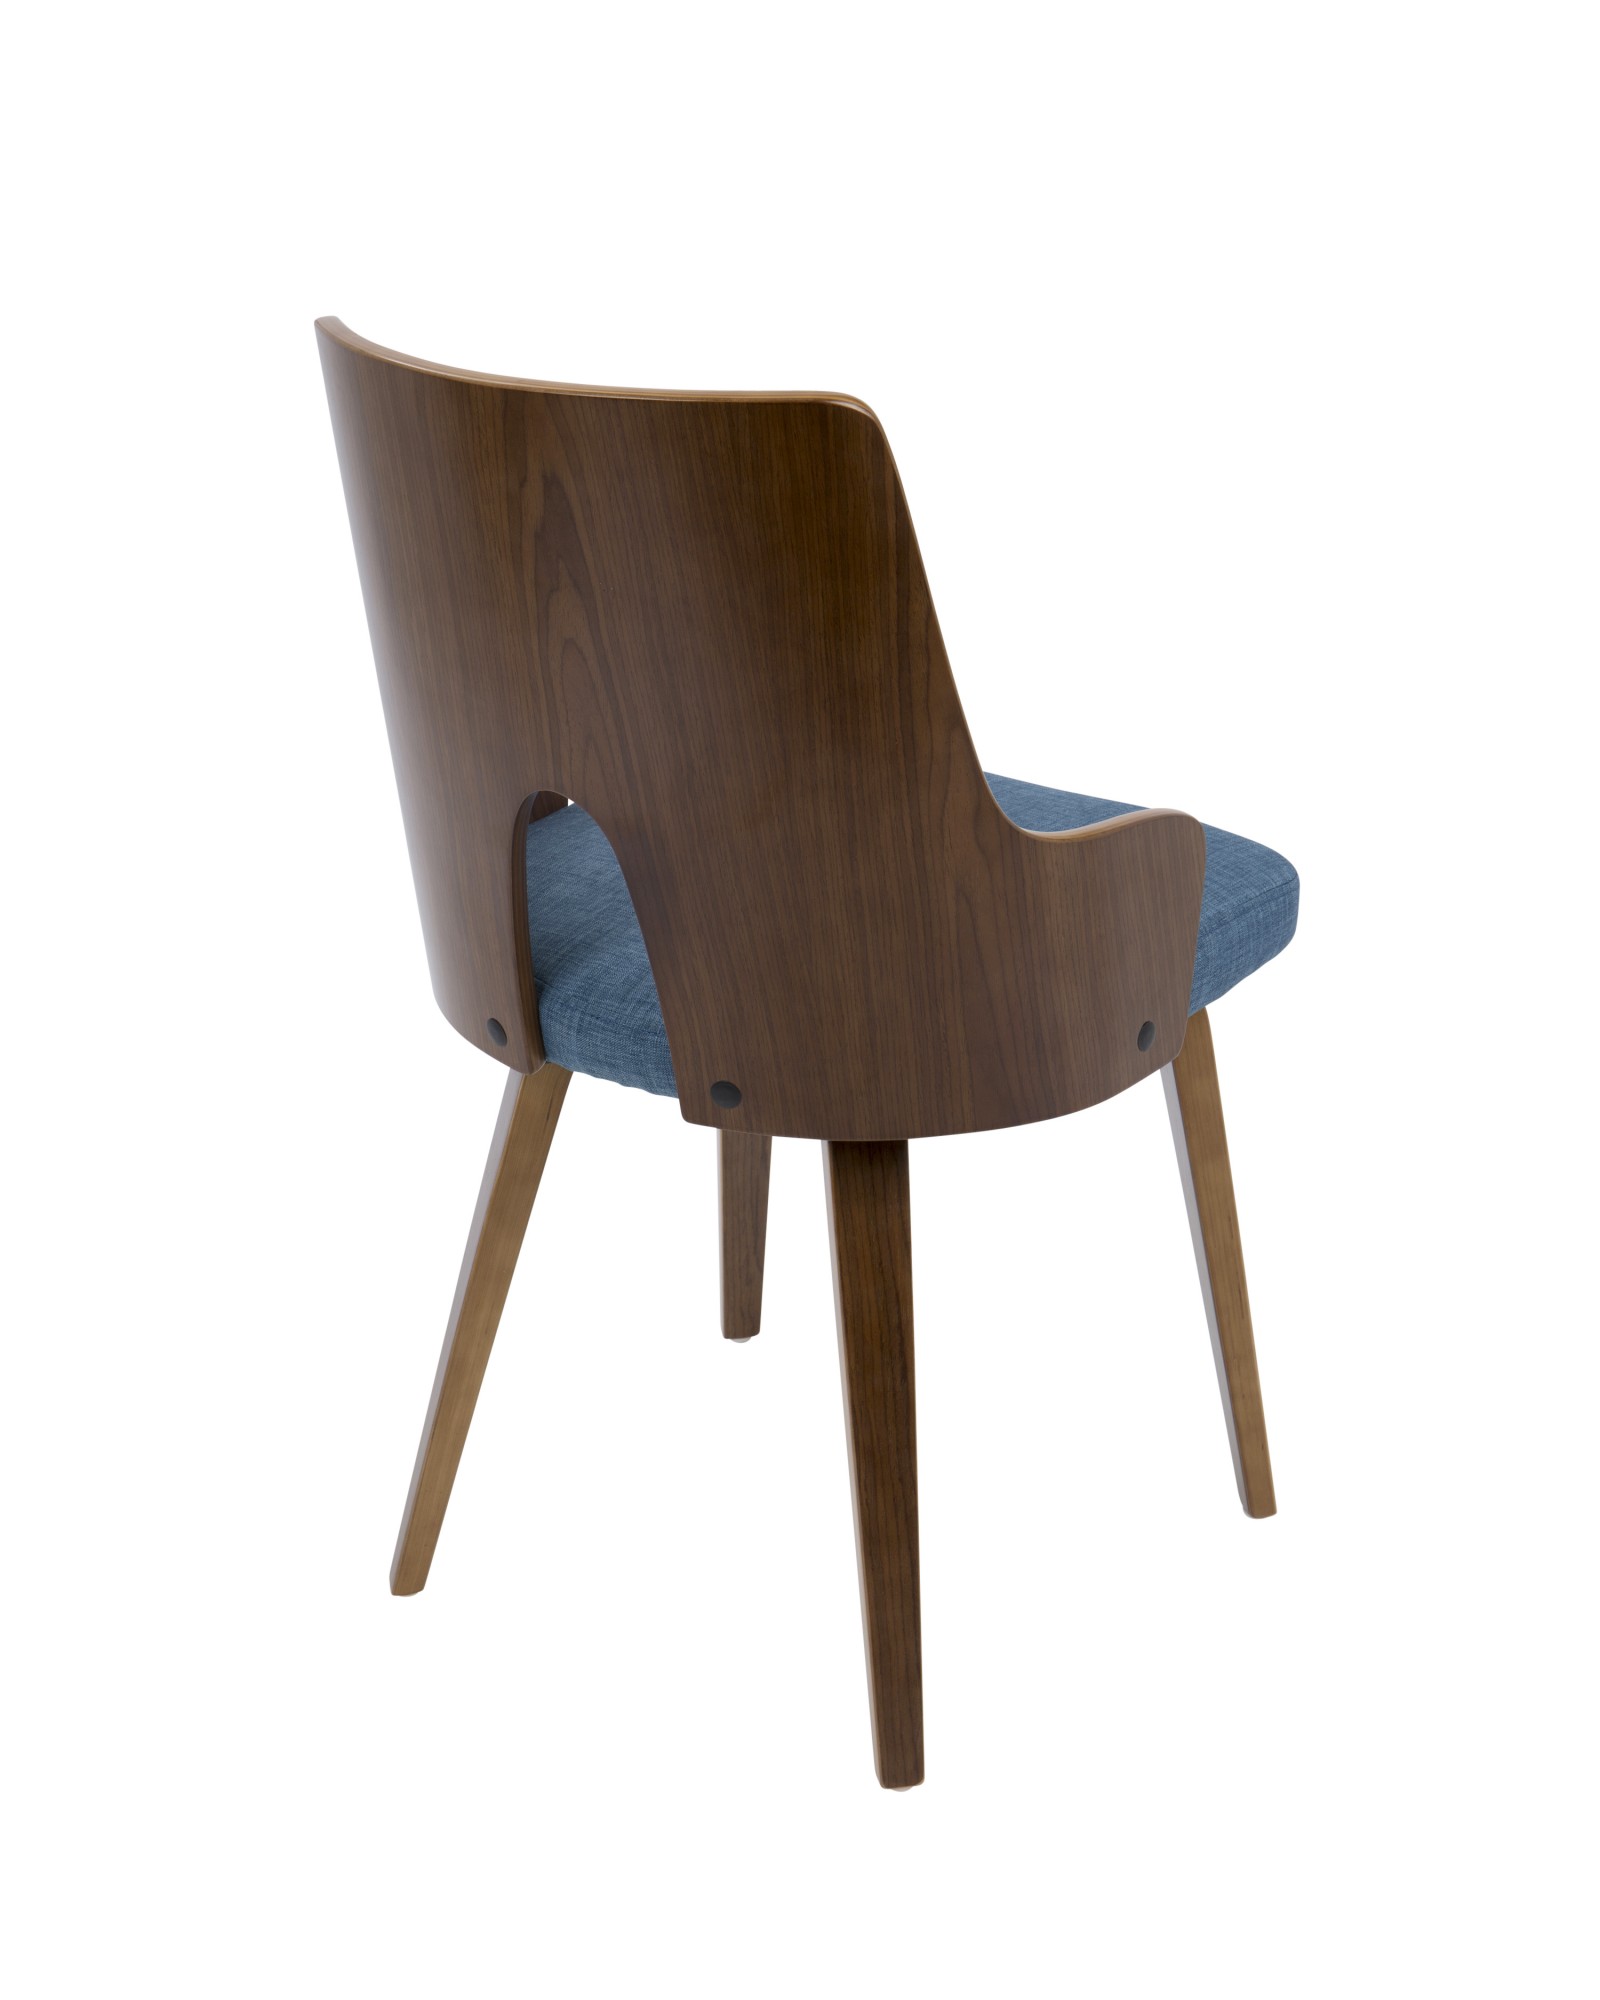 Ariana Mid-Century Modern Dining/Accent Chair in Walnut and Blue Fabric - Set of 2